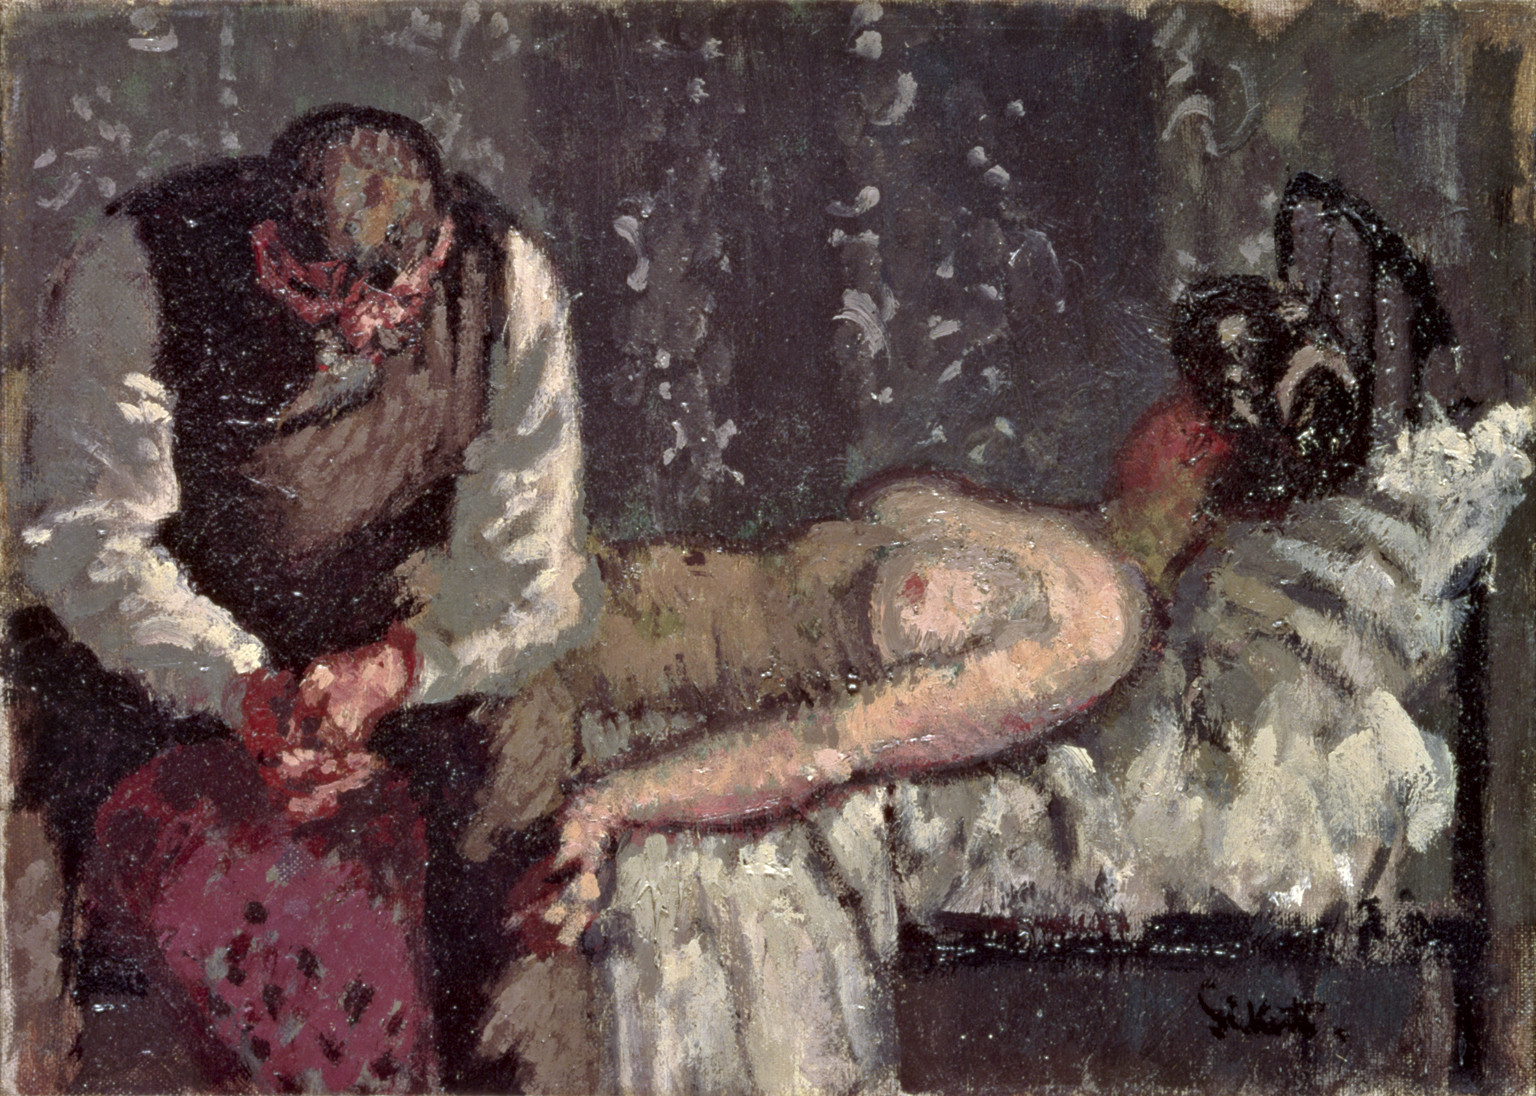 Walter Sickert, The Camden Town Murder or What Shall We Do about the Rent? c.1908, Yale Center for British Art